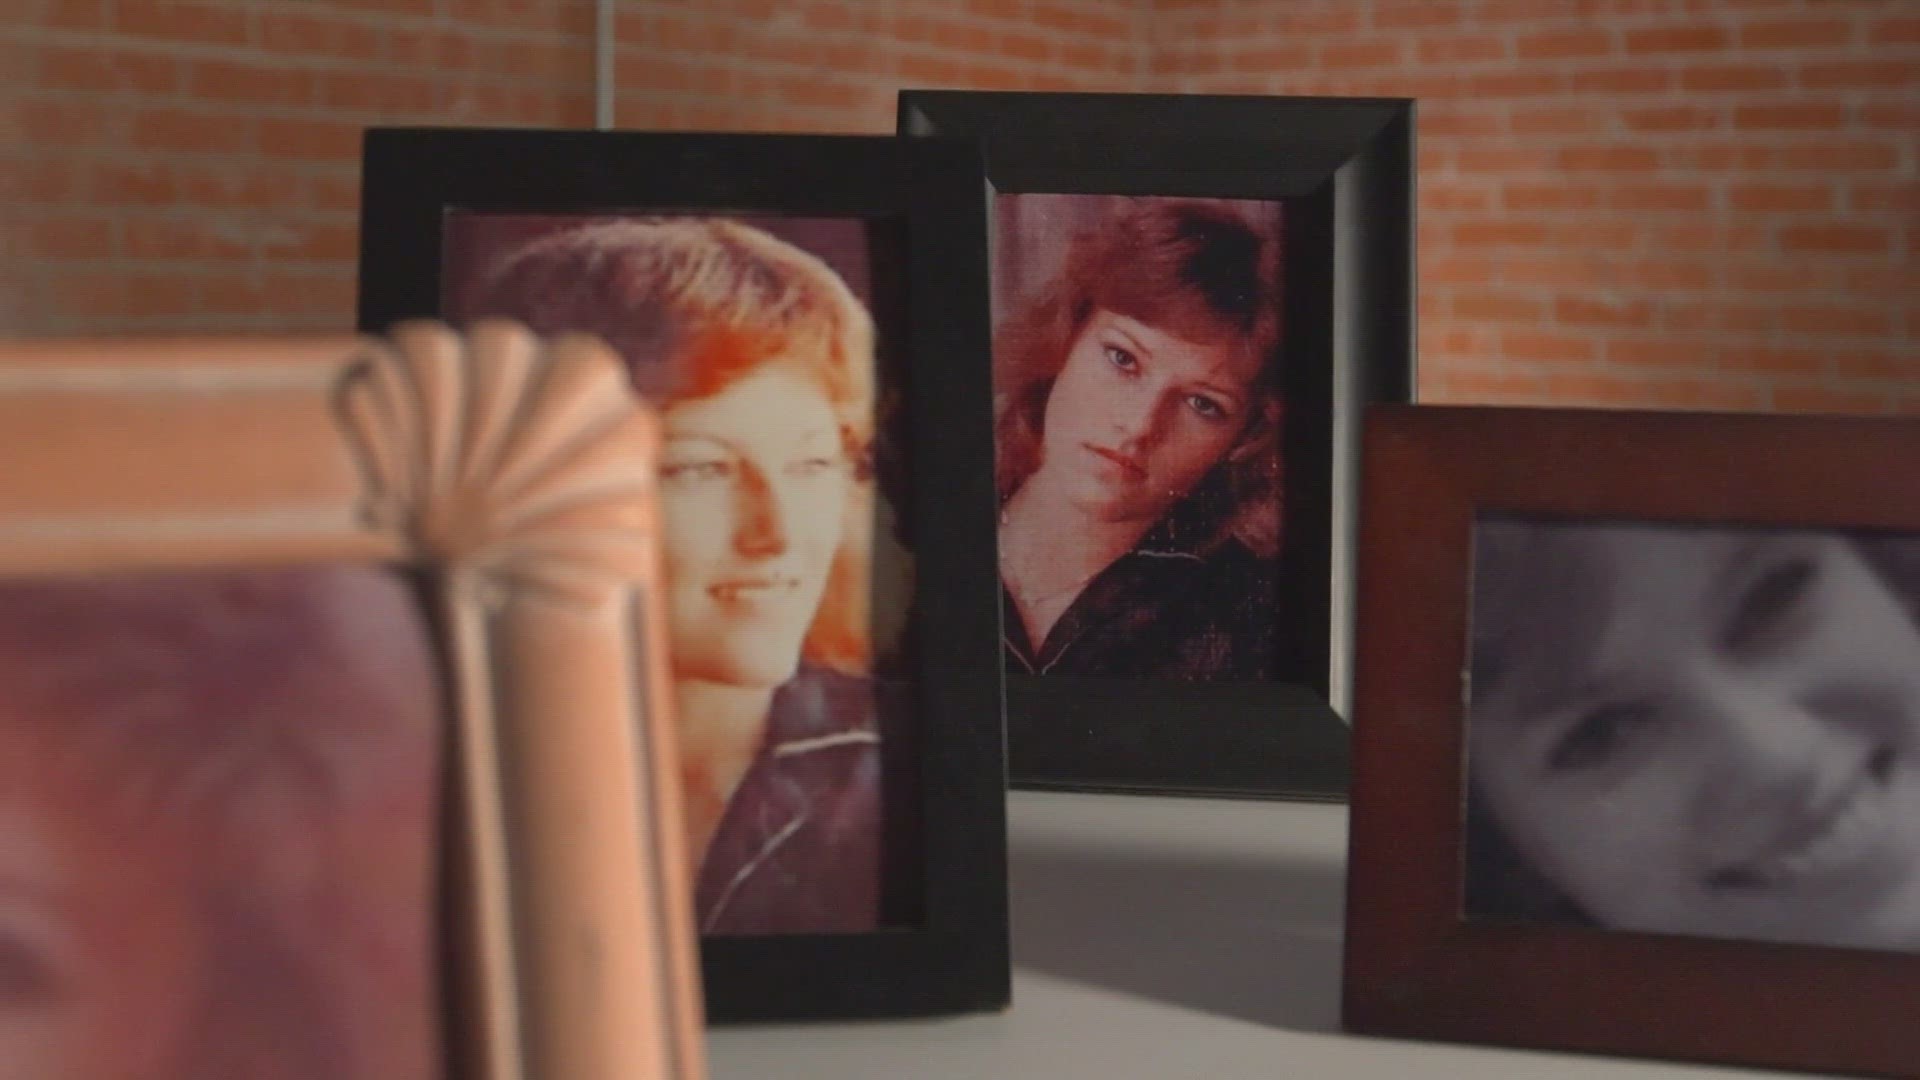 Holly Palmer was murdered just a few blocks away from the Justice Center in Granbury. But for 35 years, justice has eluded police and the Palmer family.